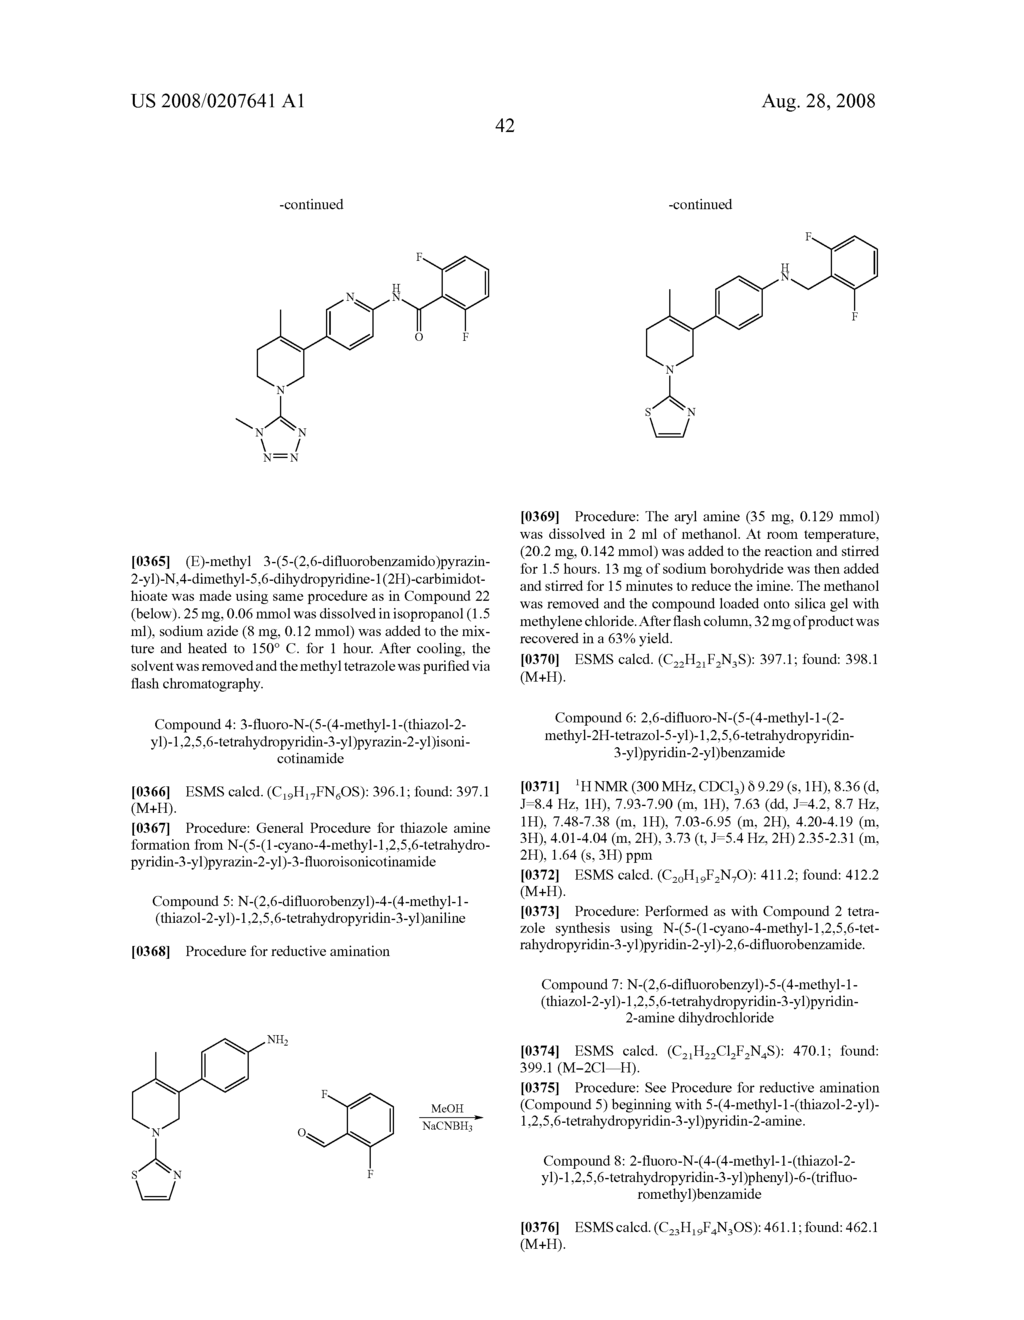 CYCLOHEXENYL-ARYL COMPOUNDS FOR INFLAMMATION AND IMMUNE-RELATED USES - diagram, schematic, and image 43